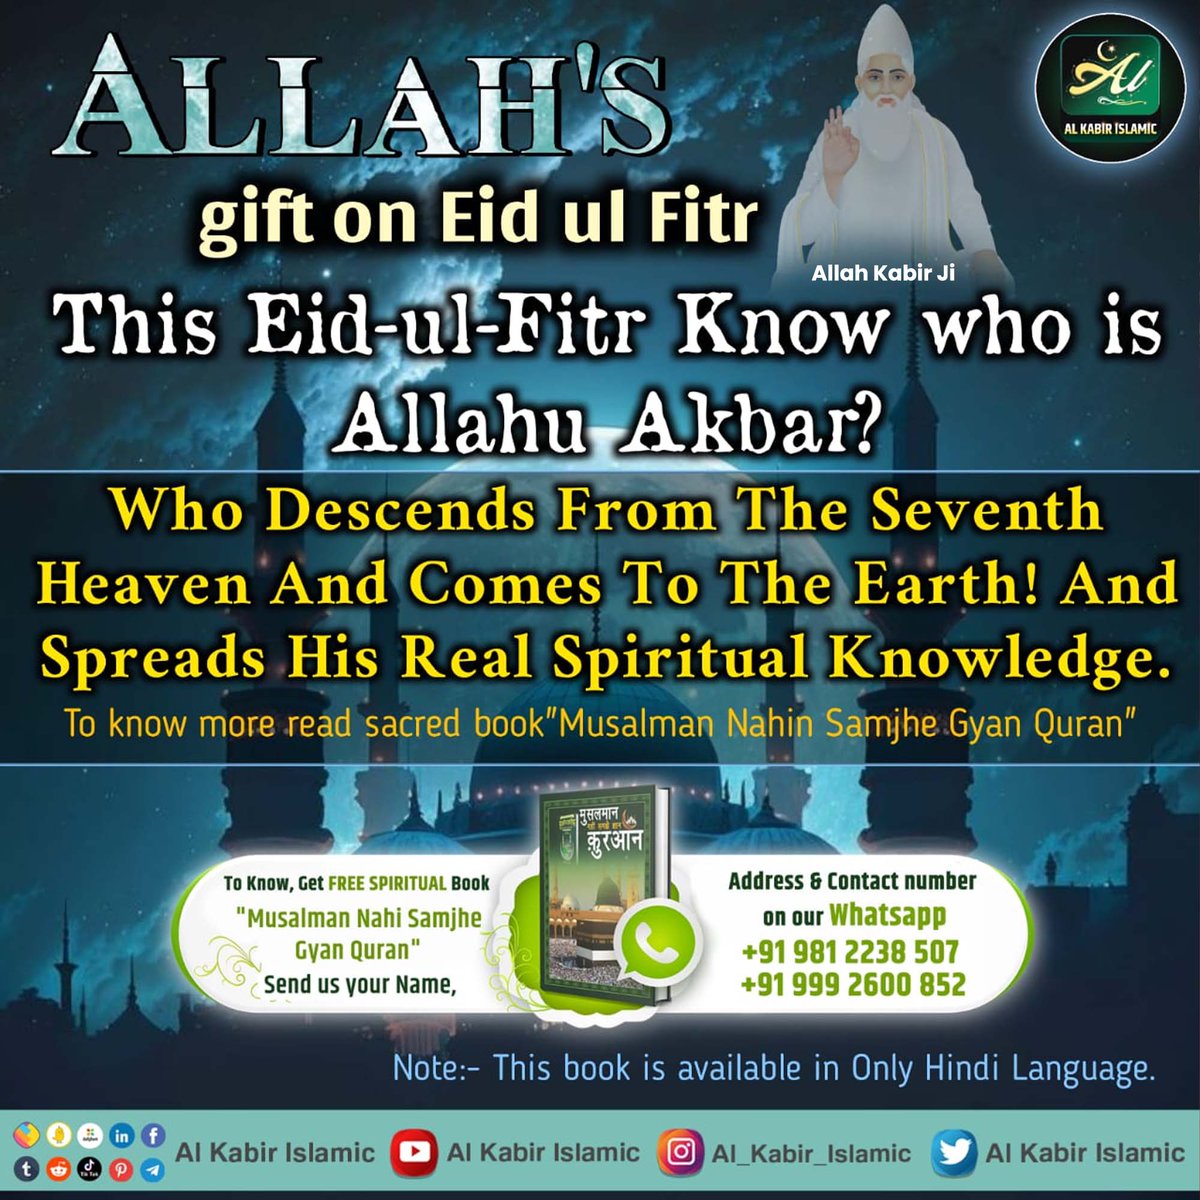 #GodMorningMonday 

God (Allah) in Islam As Per the Holy Quran Sharif The inherent knowledge of #QuranSharif in Islam has been missed out on by the proponents of Islam. Must read Book Musalman nahi Samjhe Gyan Quran written by Baakhabar Sant Rampal Ji Maharaj. #Mondayvibes